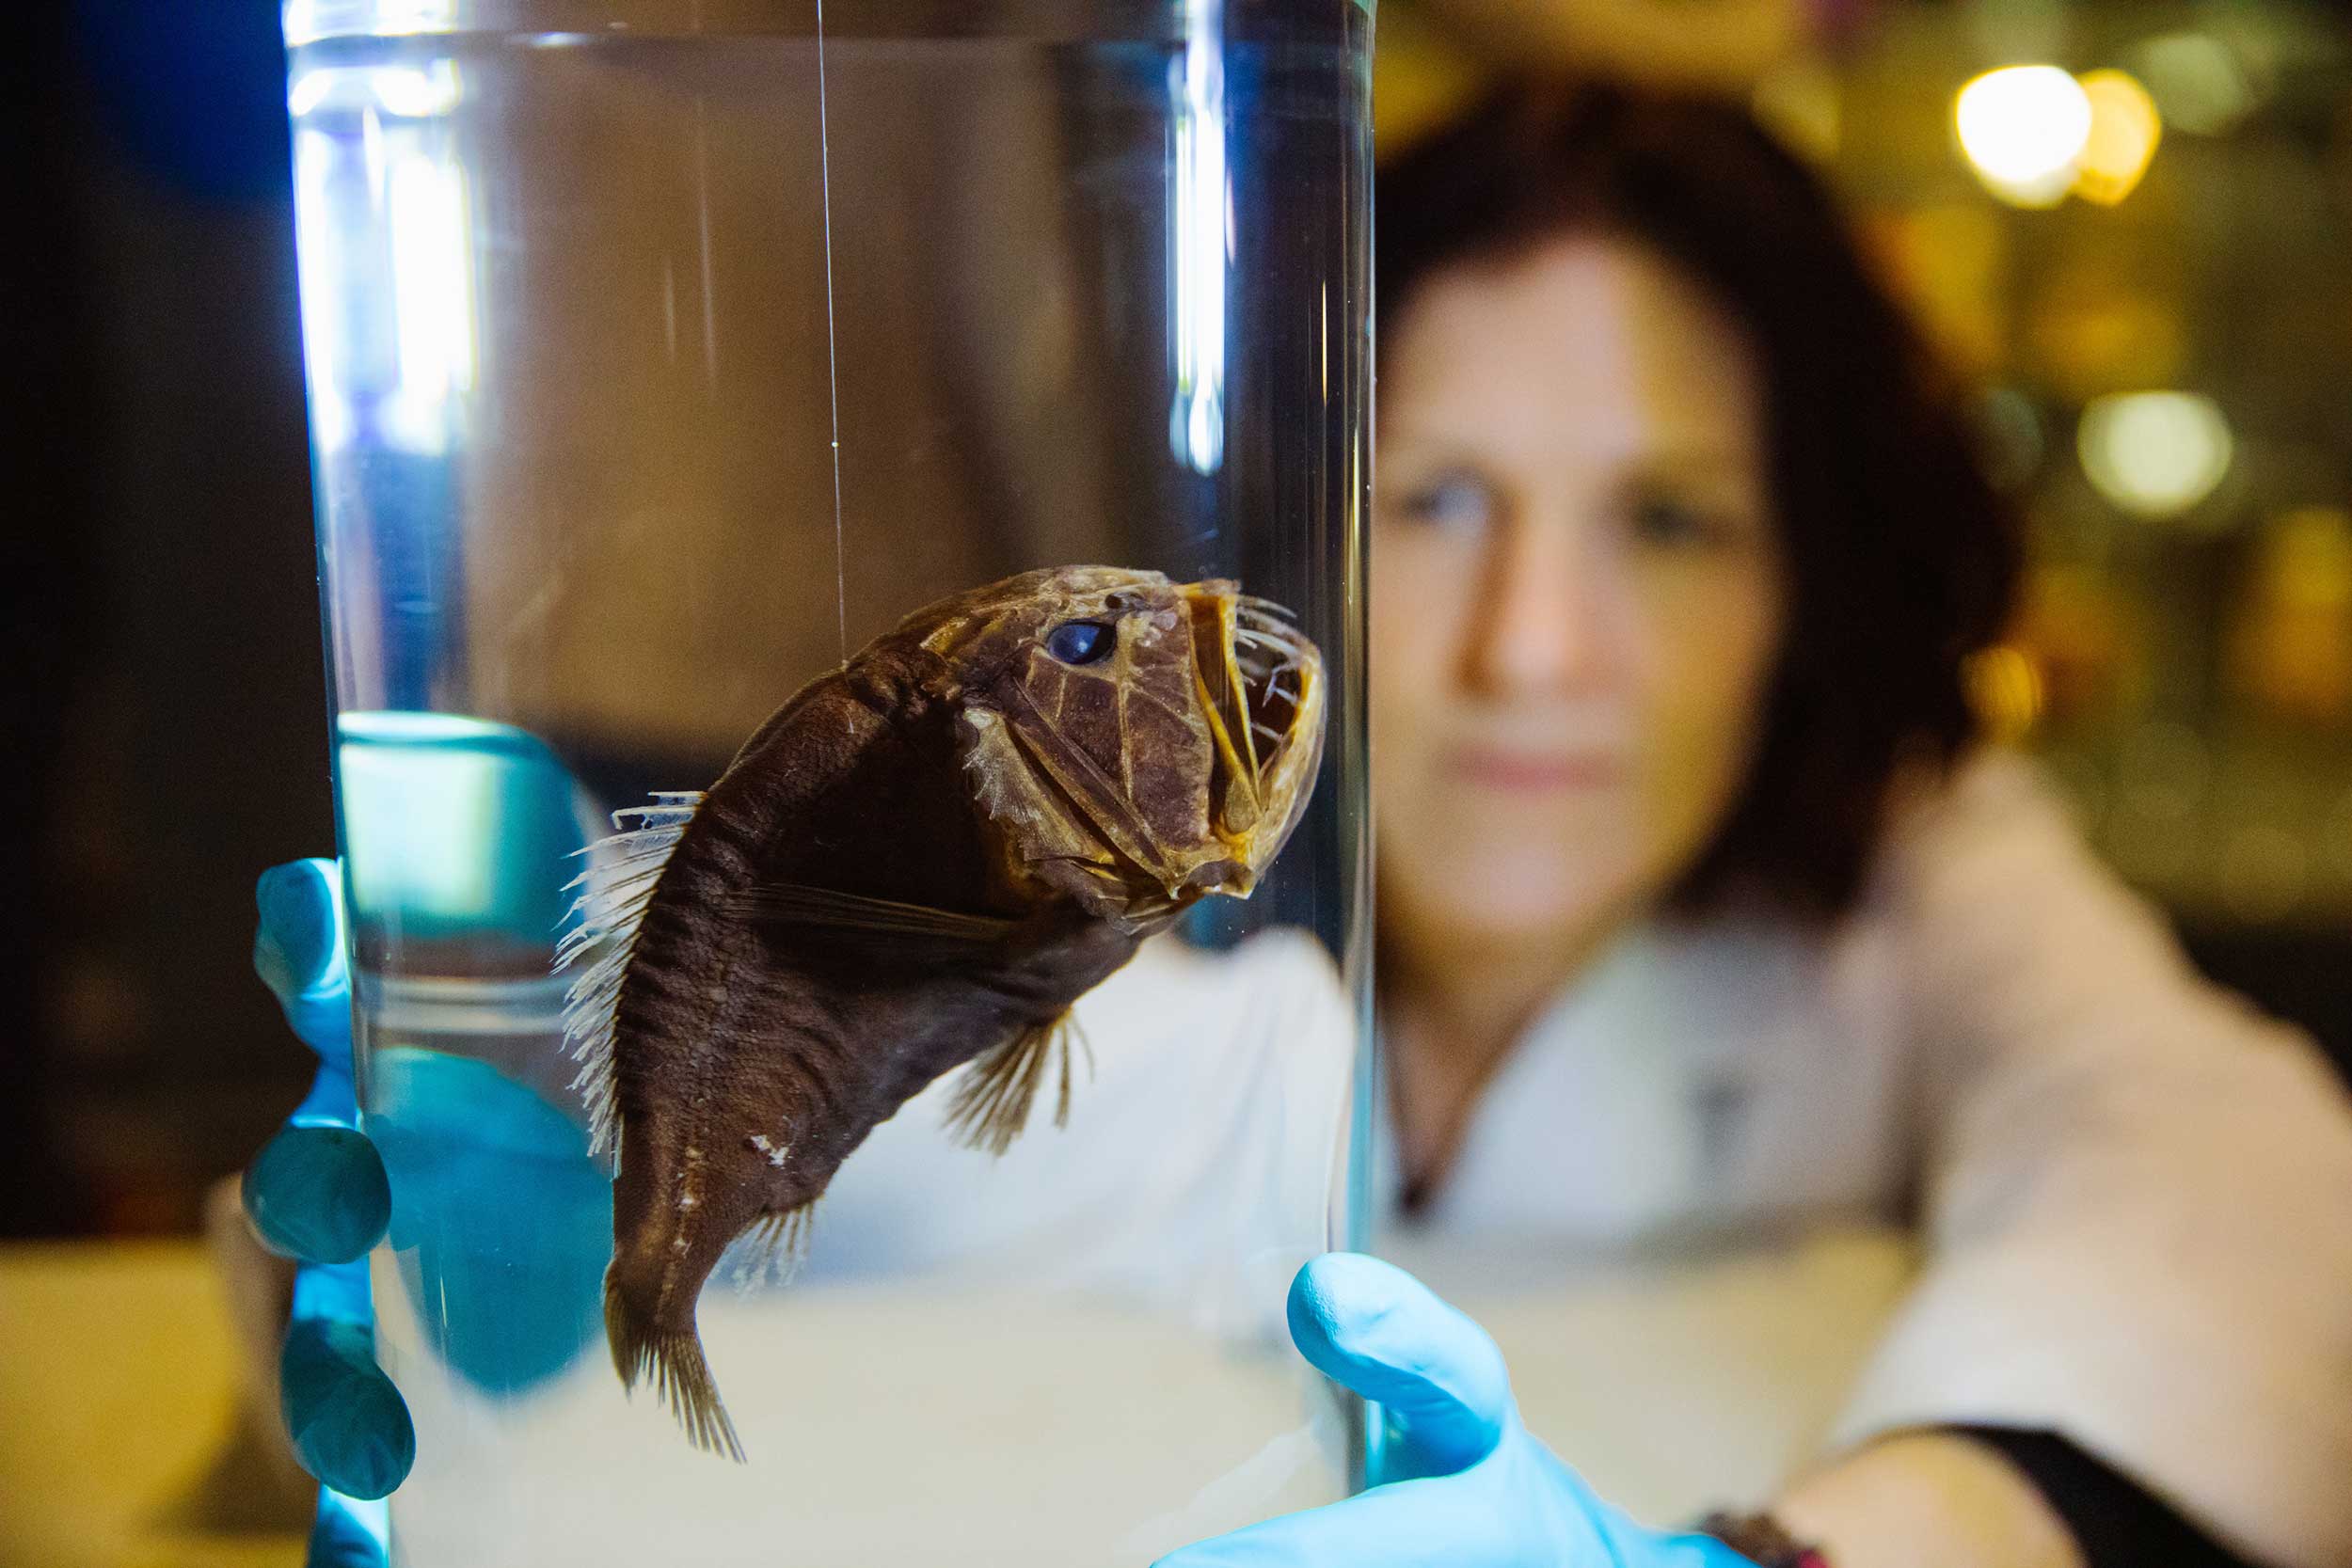 Dr Tammy Horton, dressed in a white lab coat and wearing blue gloves, holds up a jar with a preserved fangtooth fish in it.